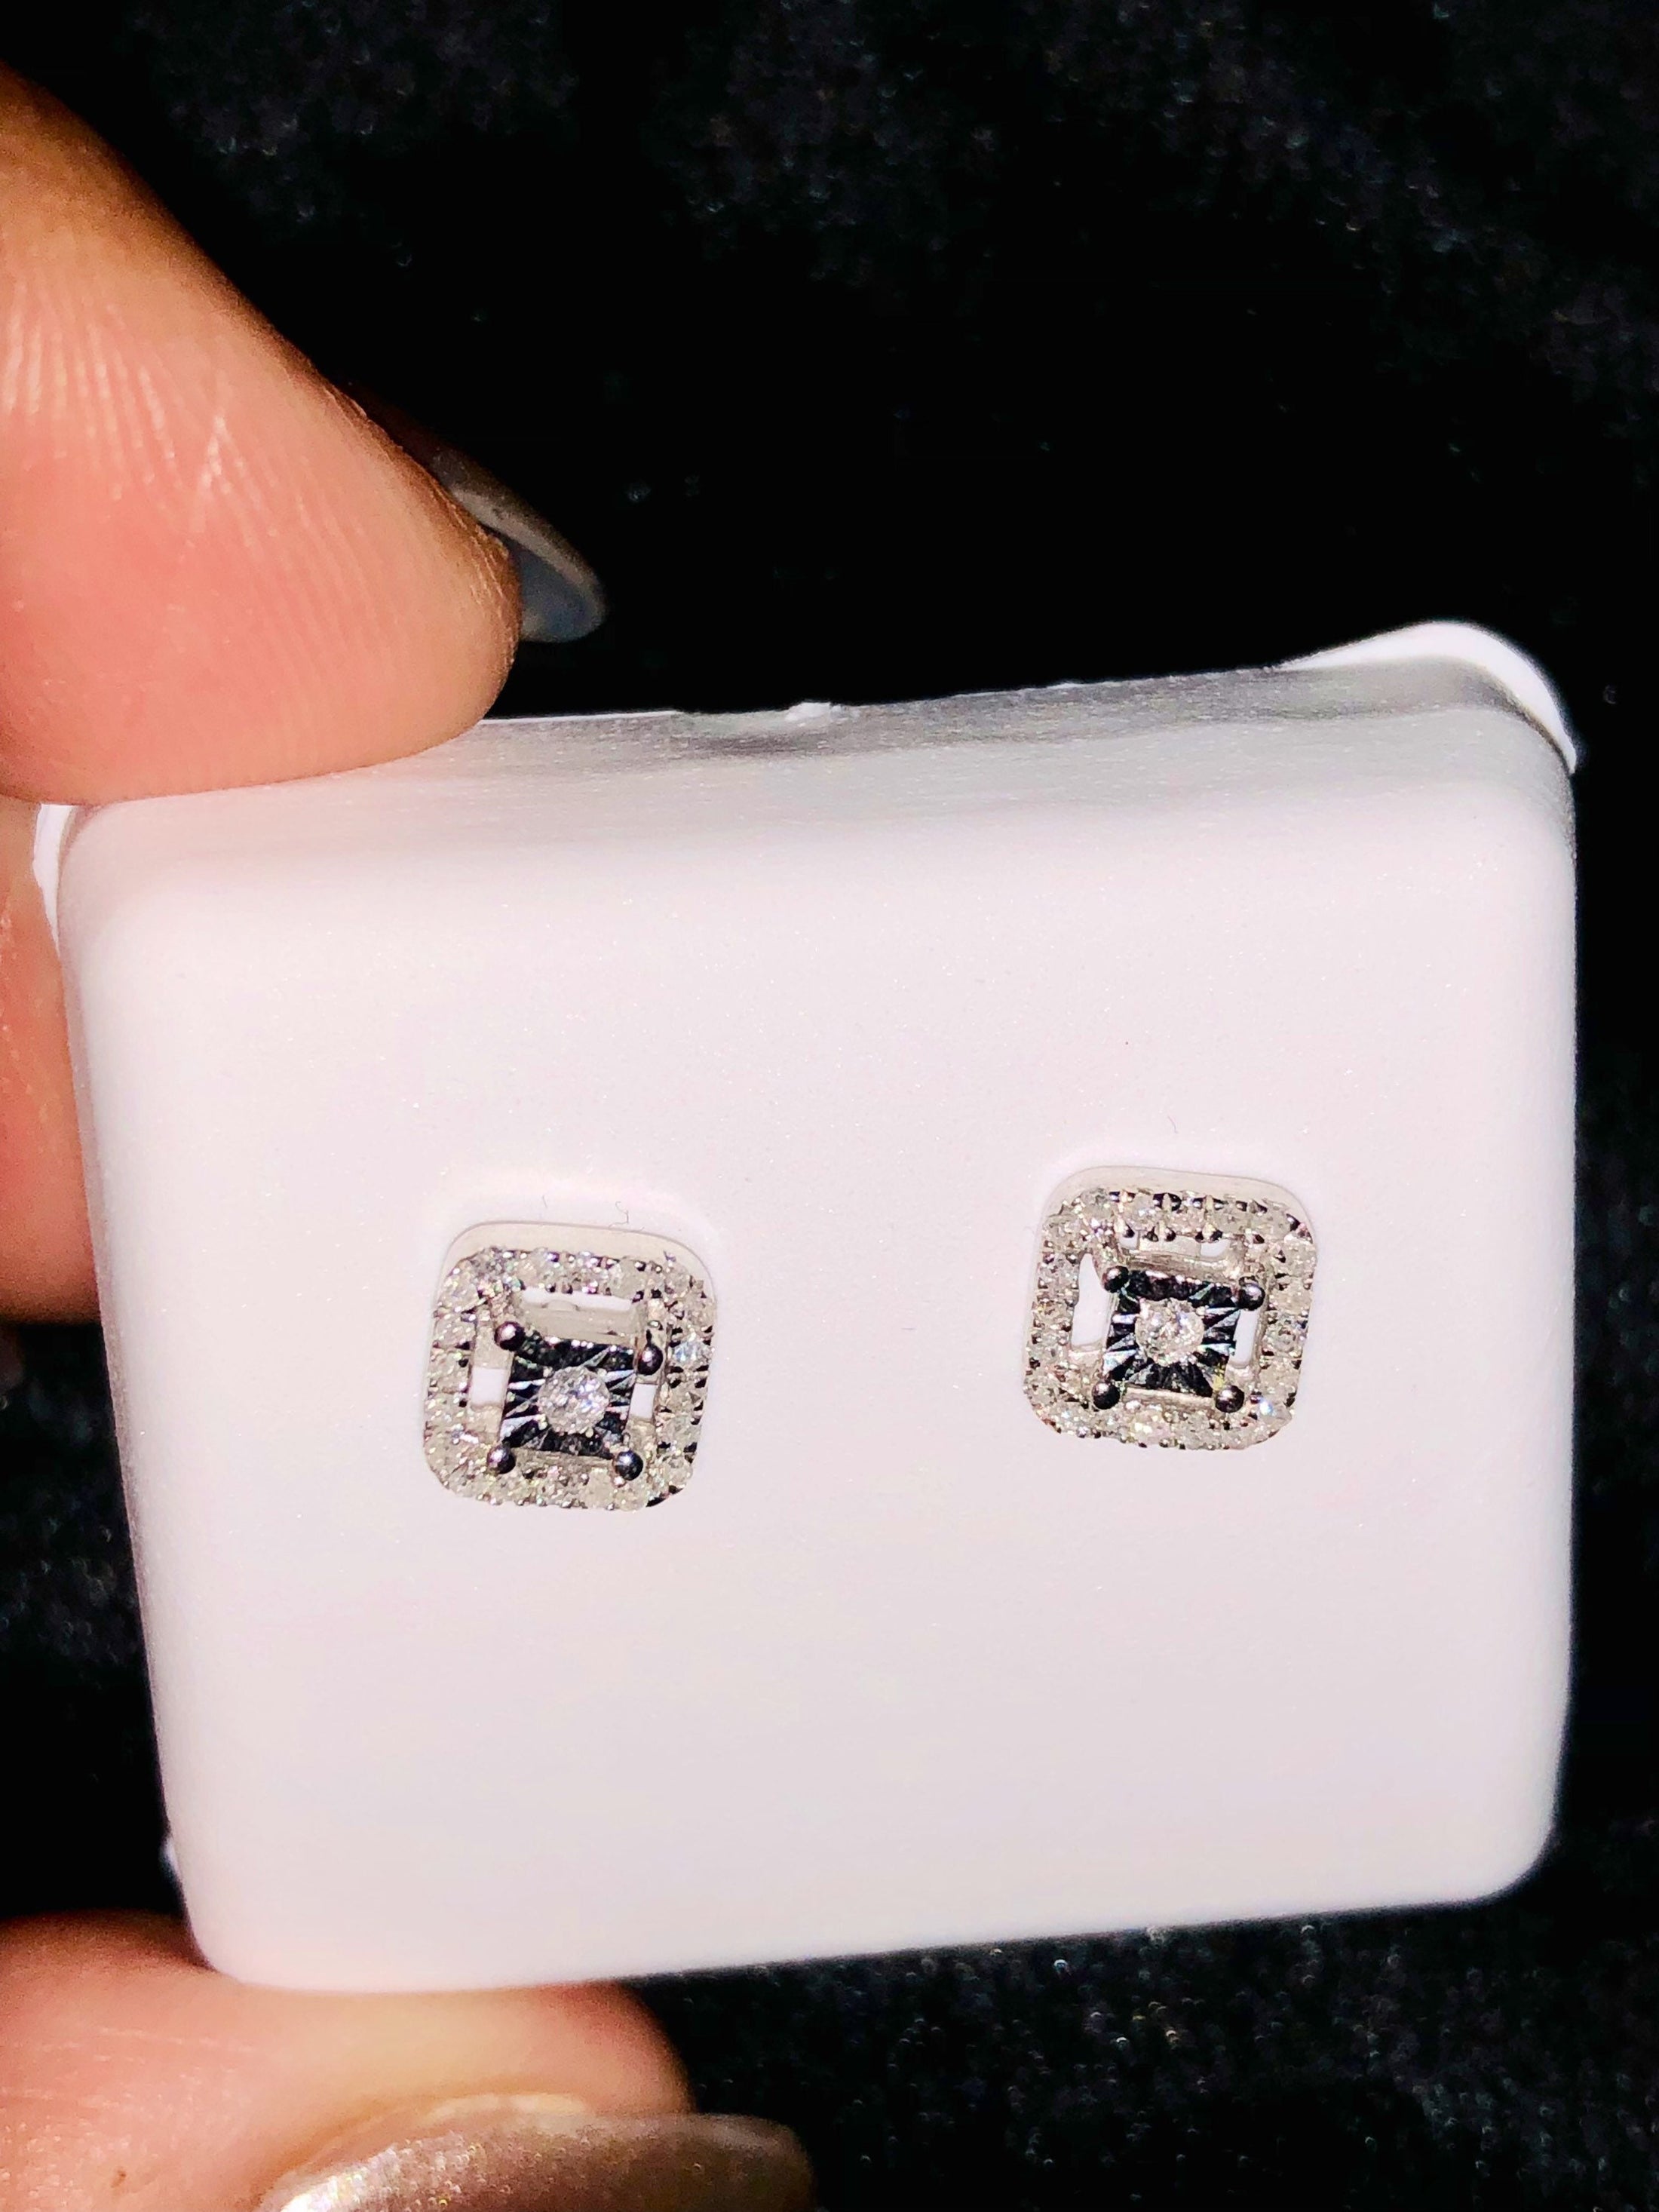 White gold Real Diamond earrings. Not CZ not moissanite comes w/ certificate of authenticity free gift packaging included best gift ever